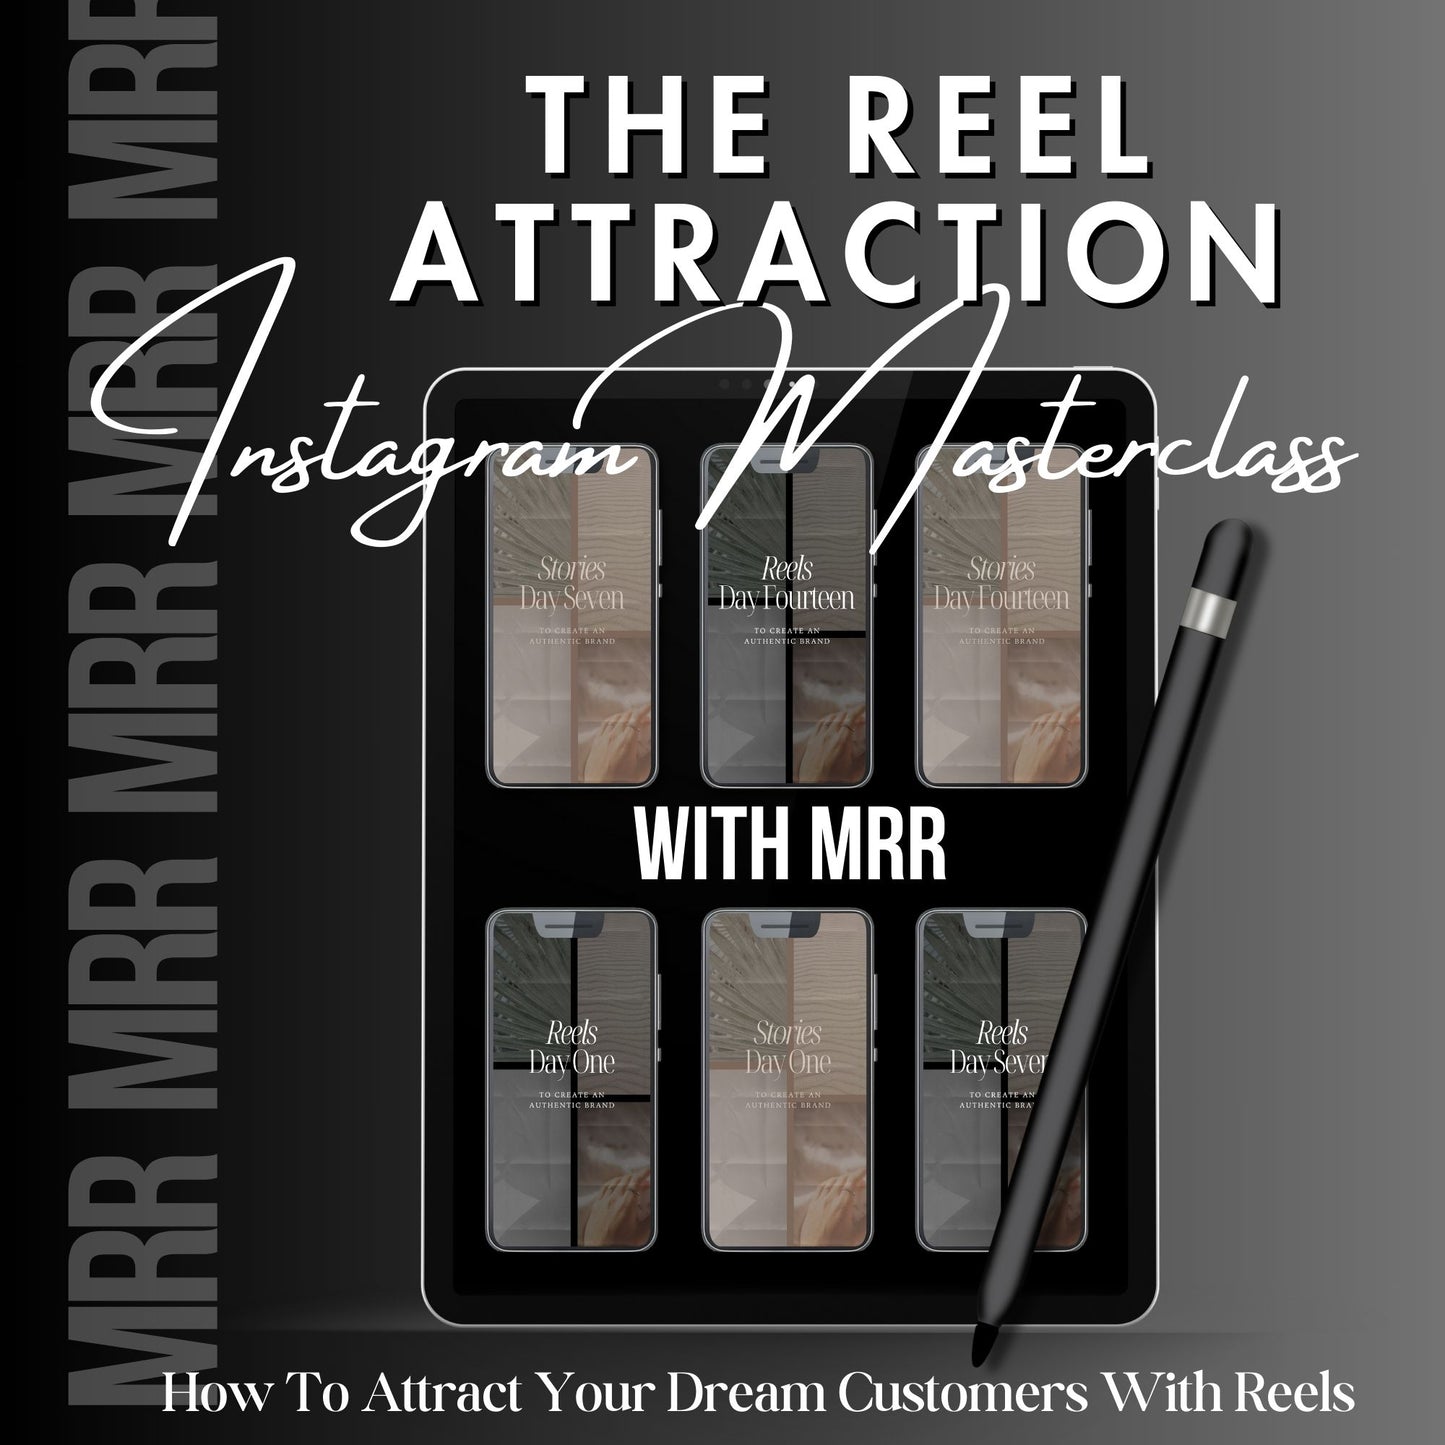 The Reel Attraction Masterclass with MRR